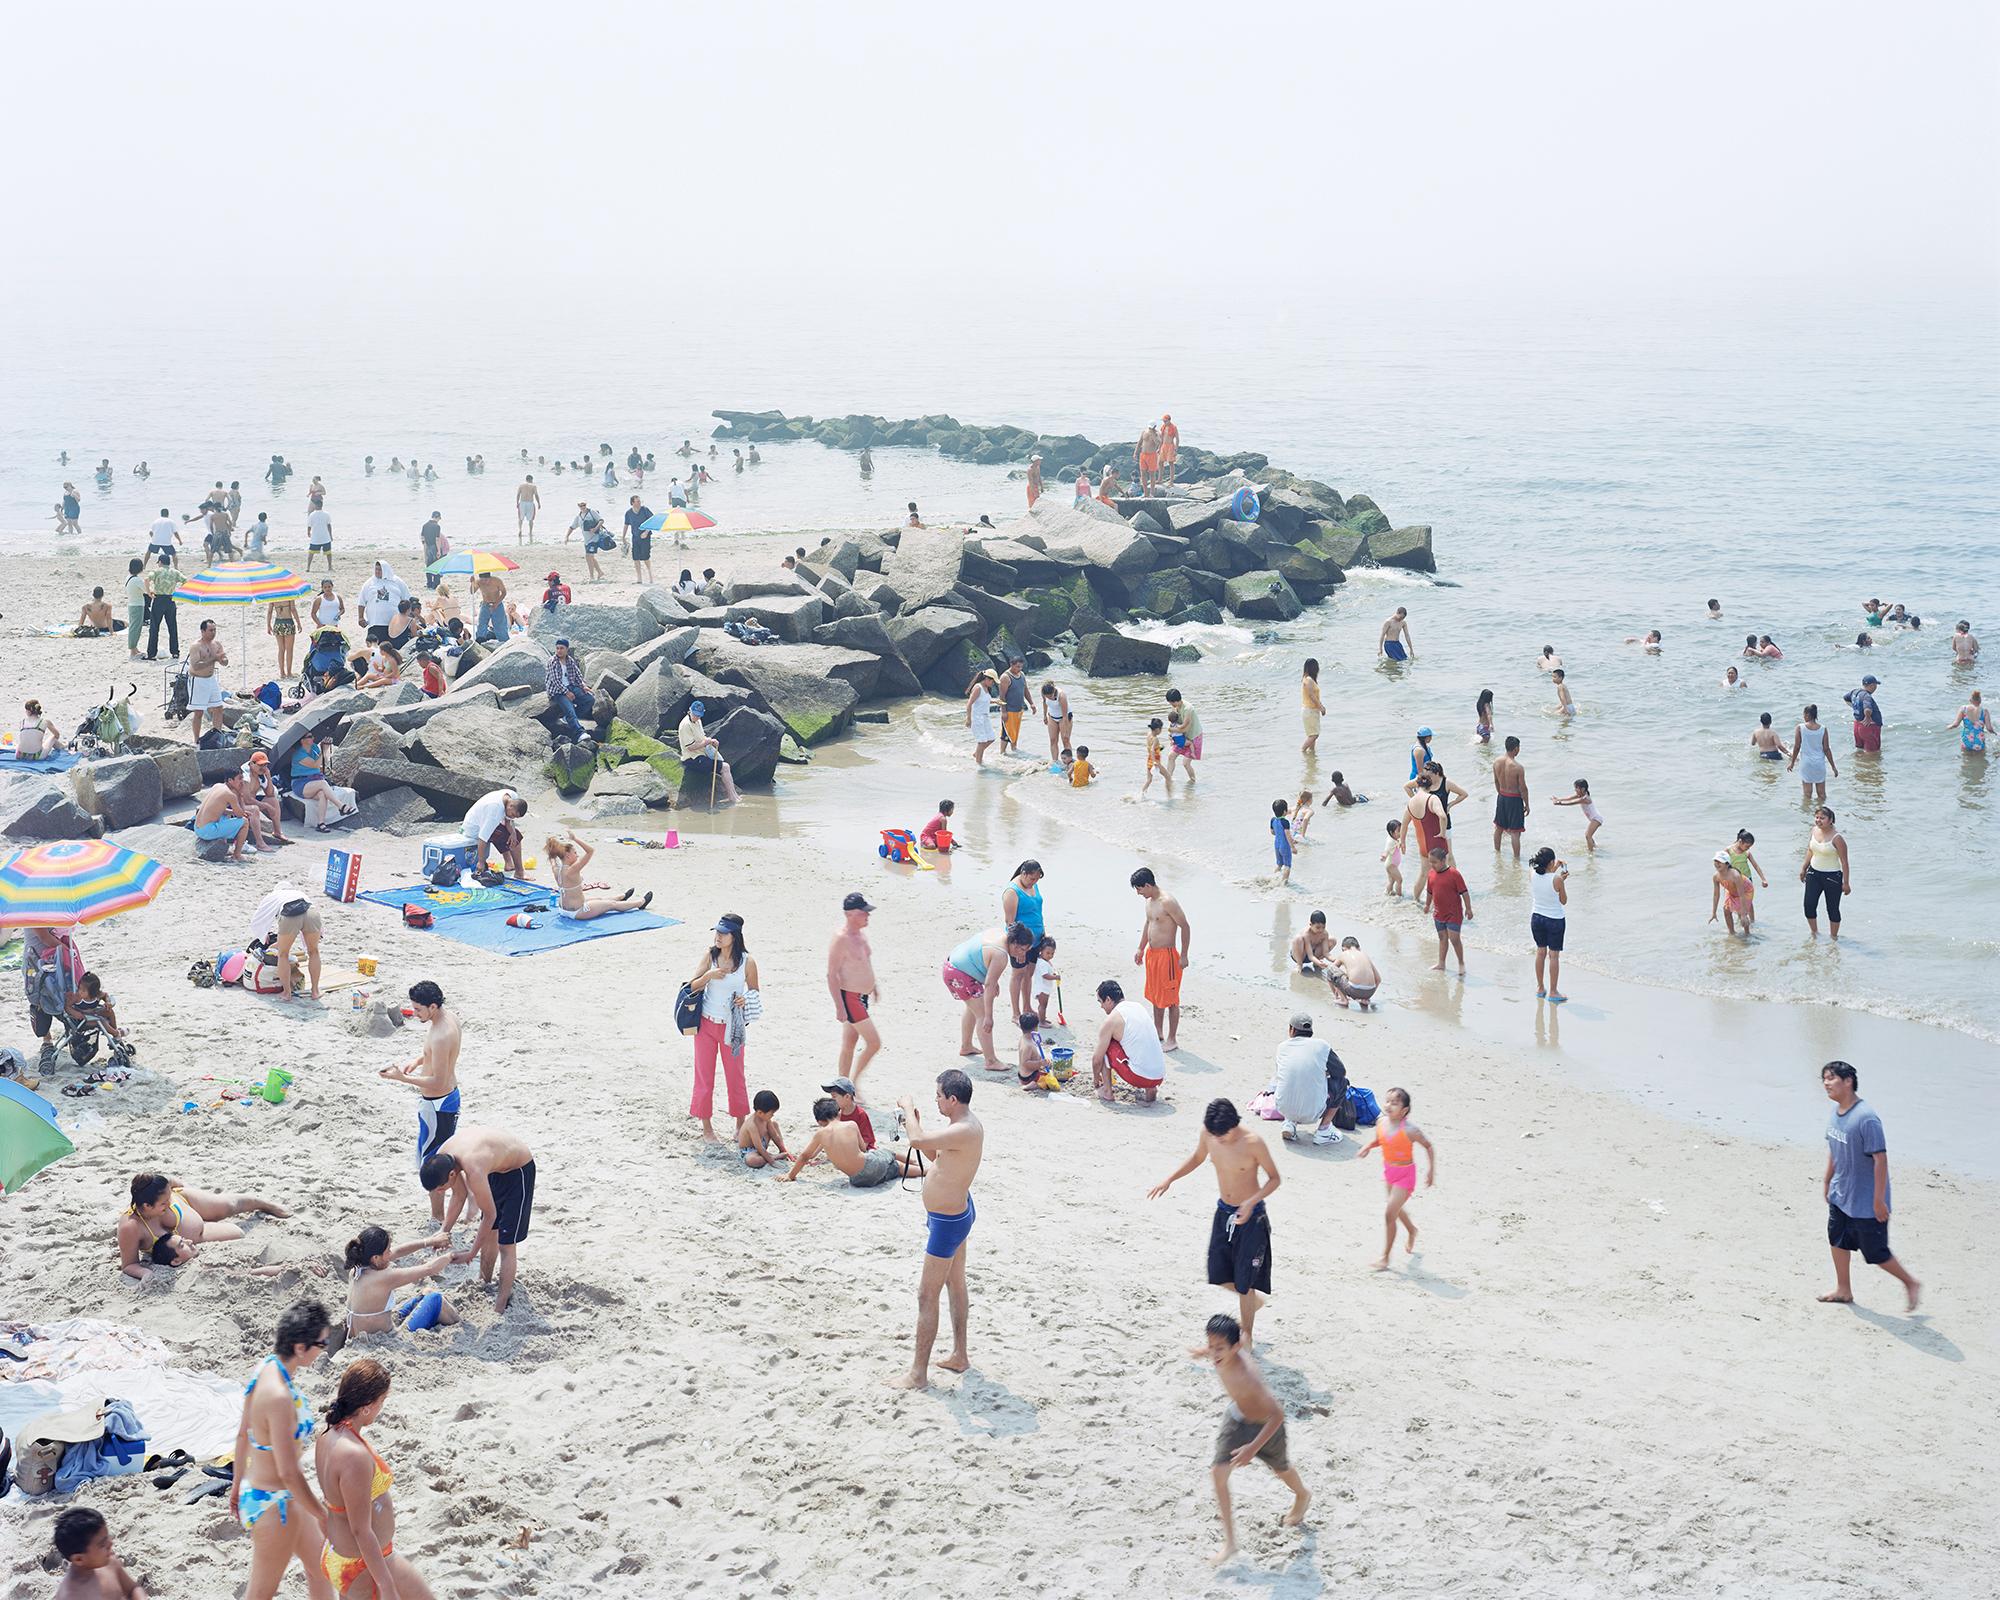 Coney Es (artist framed) - large format photograph of iconic New York beach - Photograph by Massimo Vitali